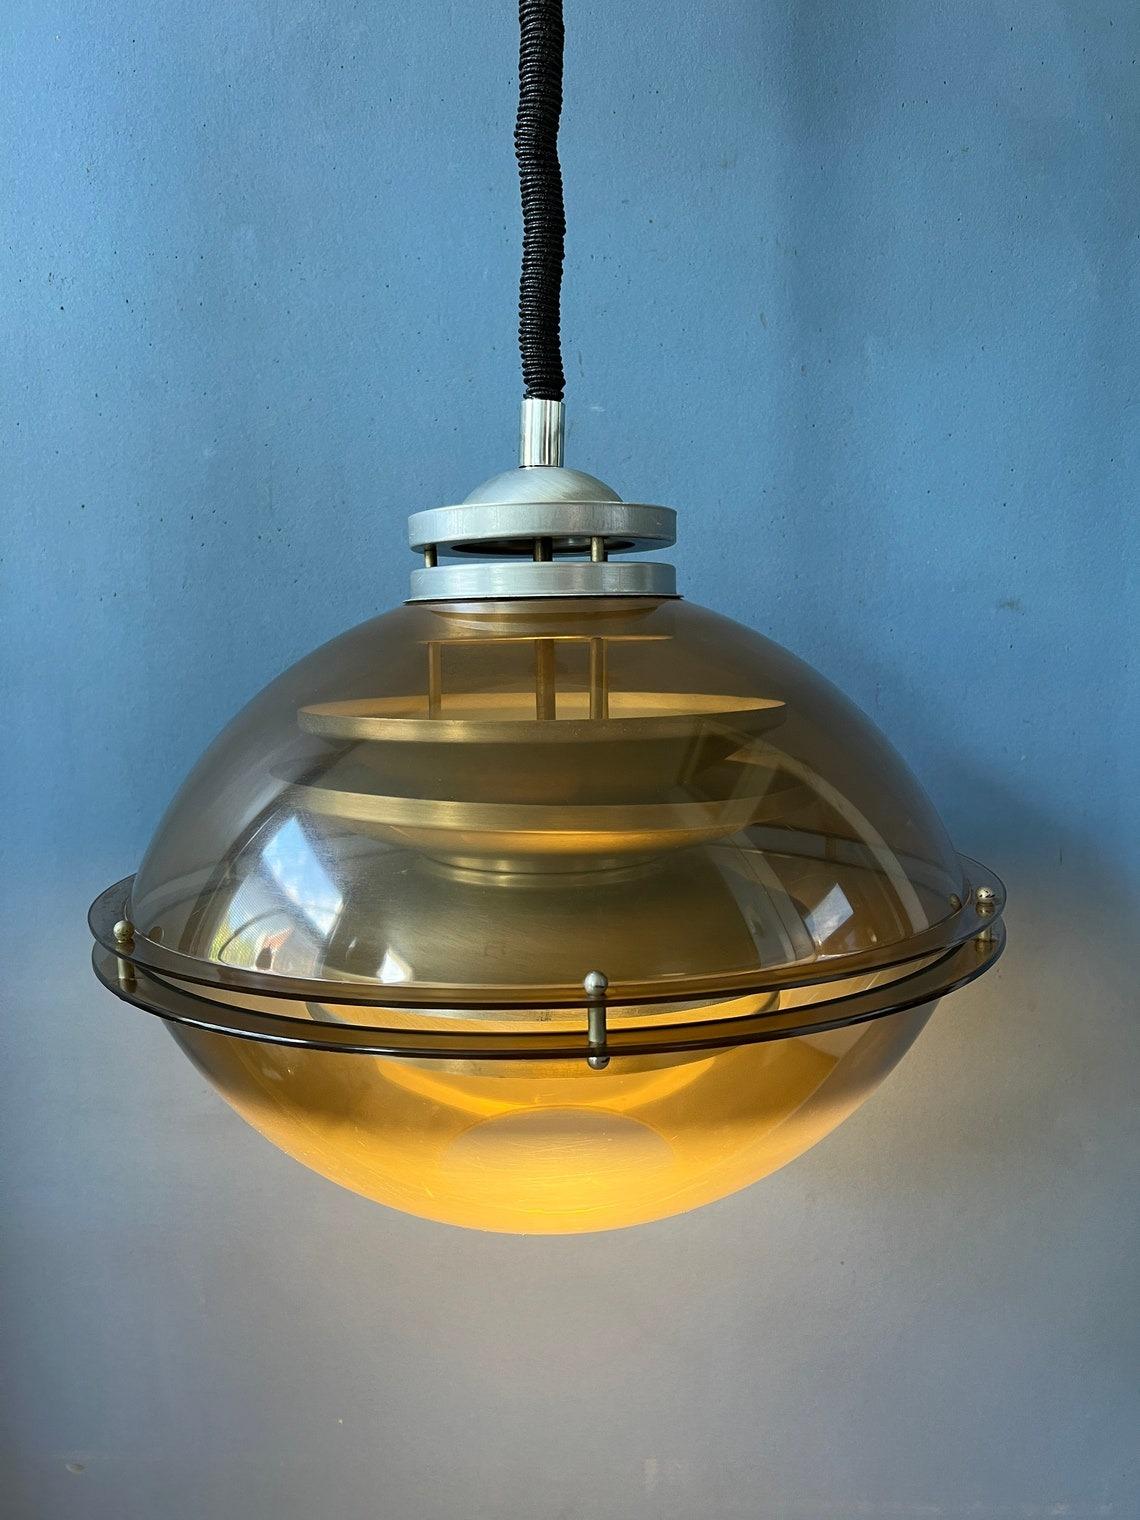 A very special space age pendant light by the Dutch brand Herda. The lamps consists of an brown/copper coloured outer shade and an aluminum inner shade. The lamp requires one E27 lightbulb and currently has an EU-plug.

Additional